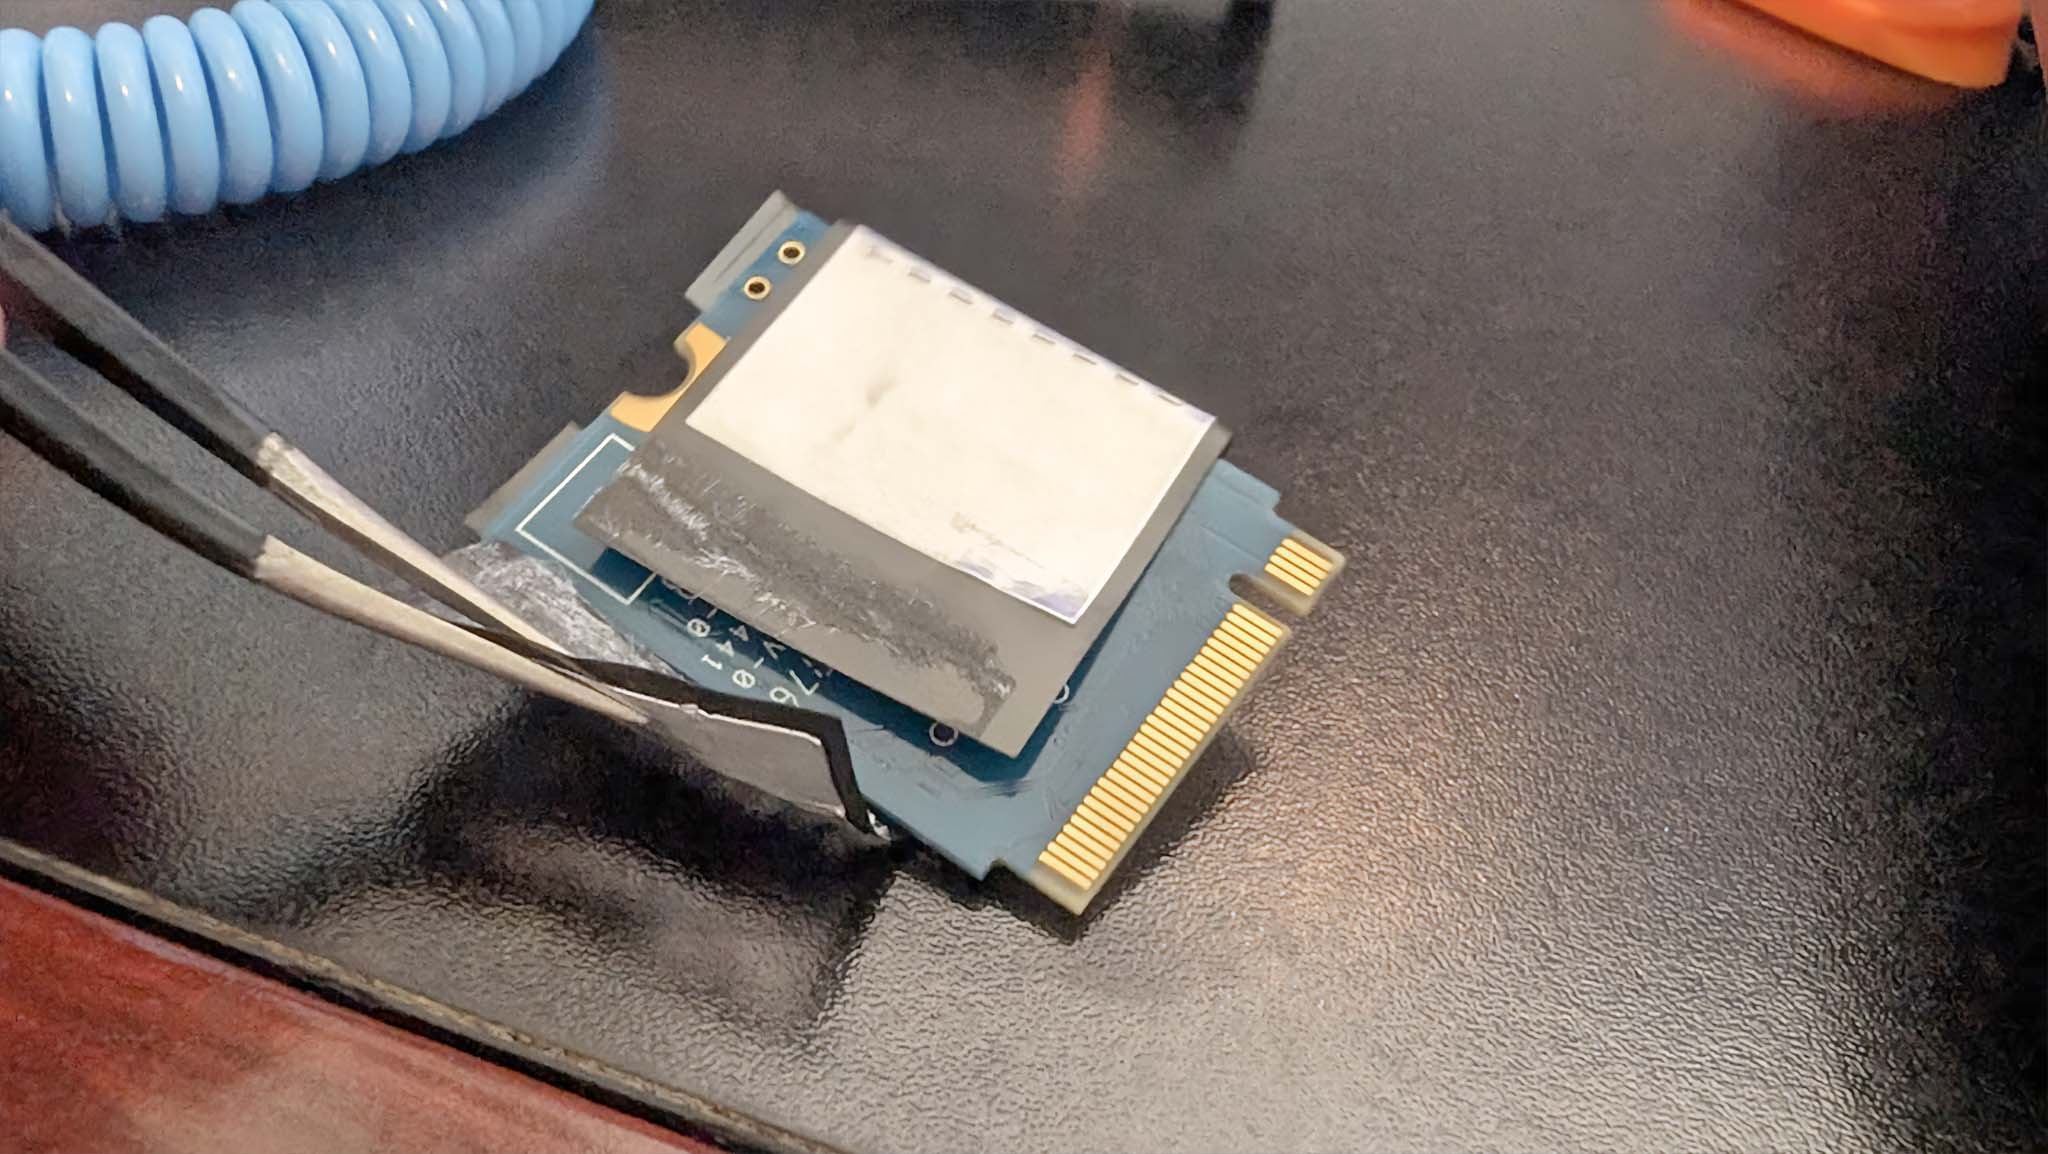 Upgrading Steam Deck SSD: Remove SSD shield from old SSD. 